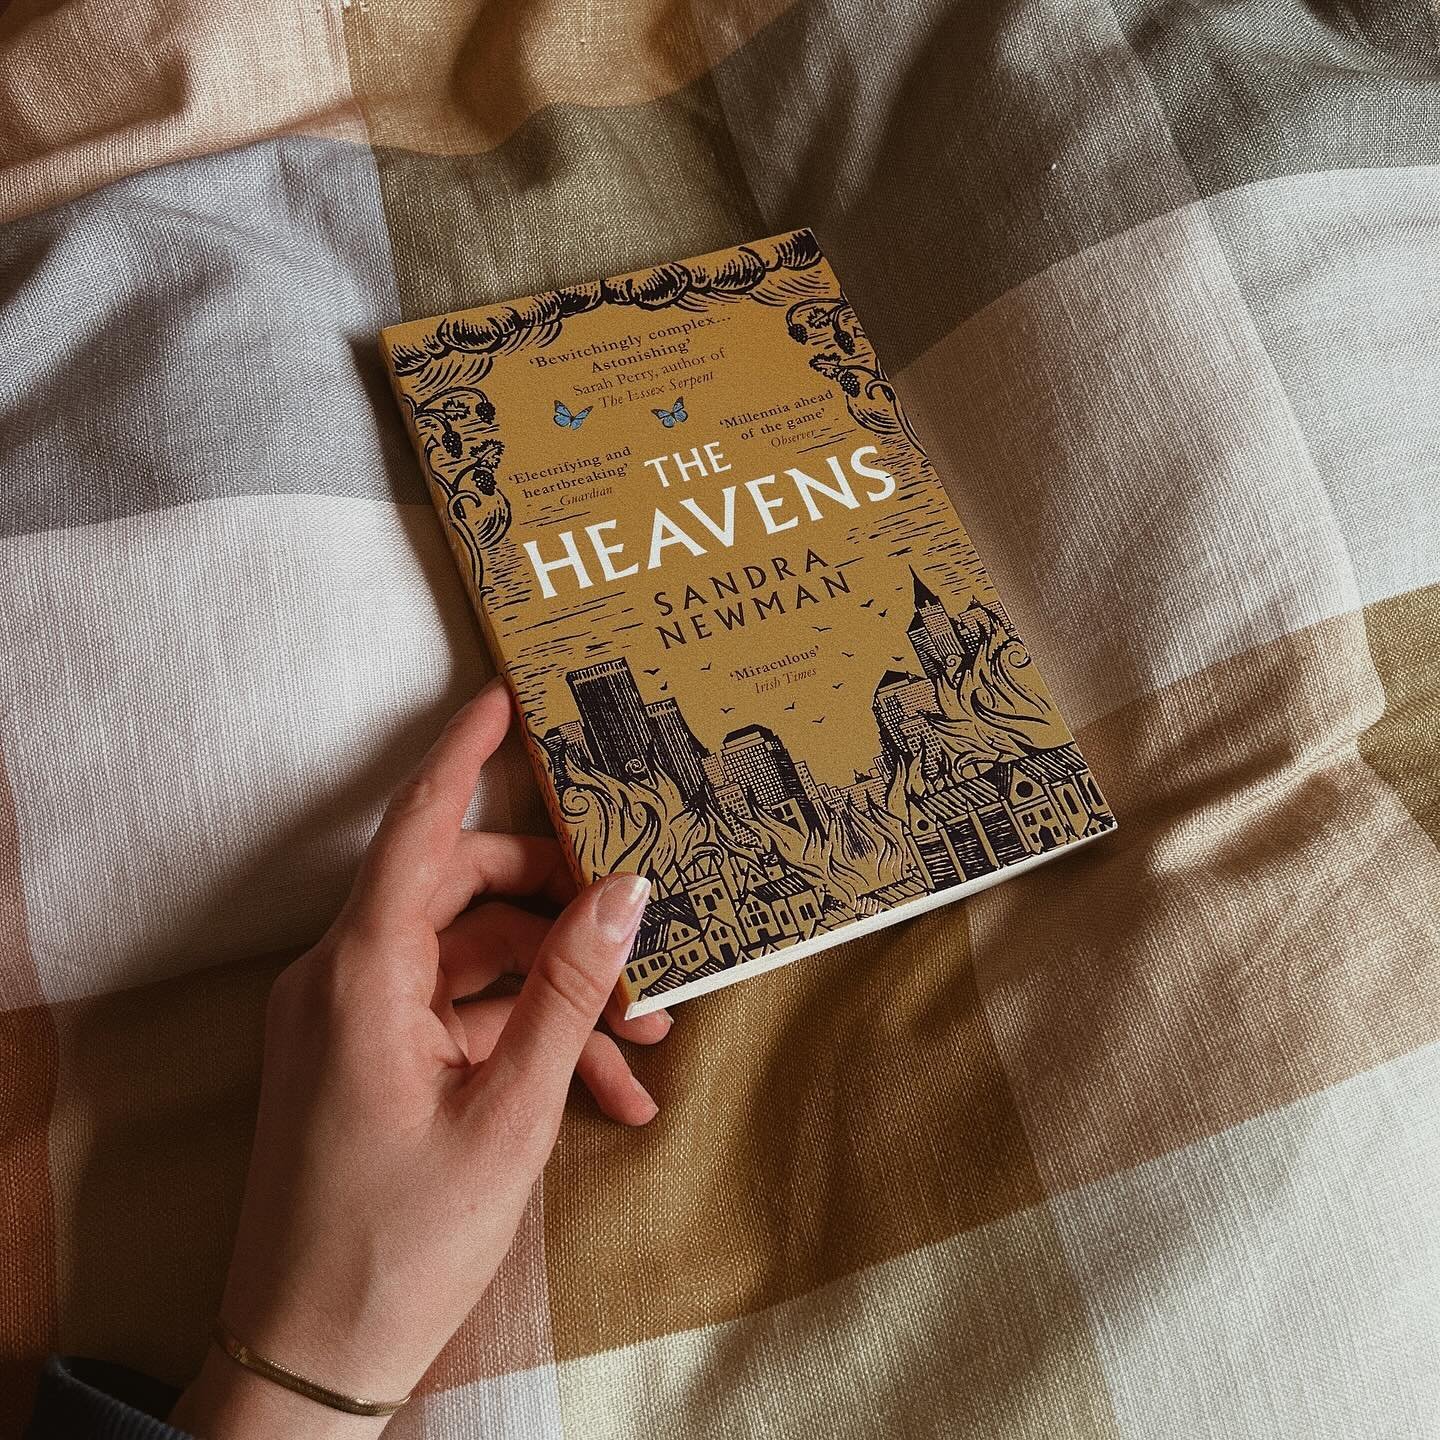 have you read this? 

saw this at @cookandyoungbooks today and couldn&rsquo;t walk past the intriguing blurb and stunning cover ✨

🏷️✨🕯️🫖
#fiction #litfic #literaryfiction #newbook #theheavens #prettycover #aestheticbook #aestheticbookstagram #aes